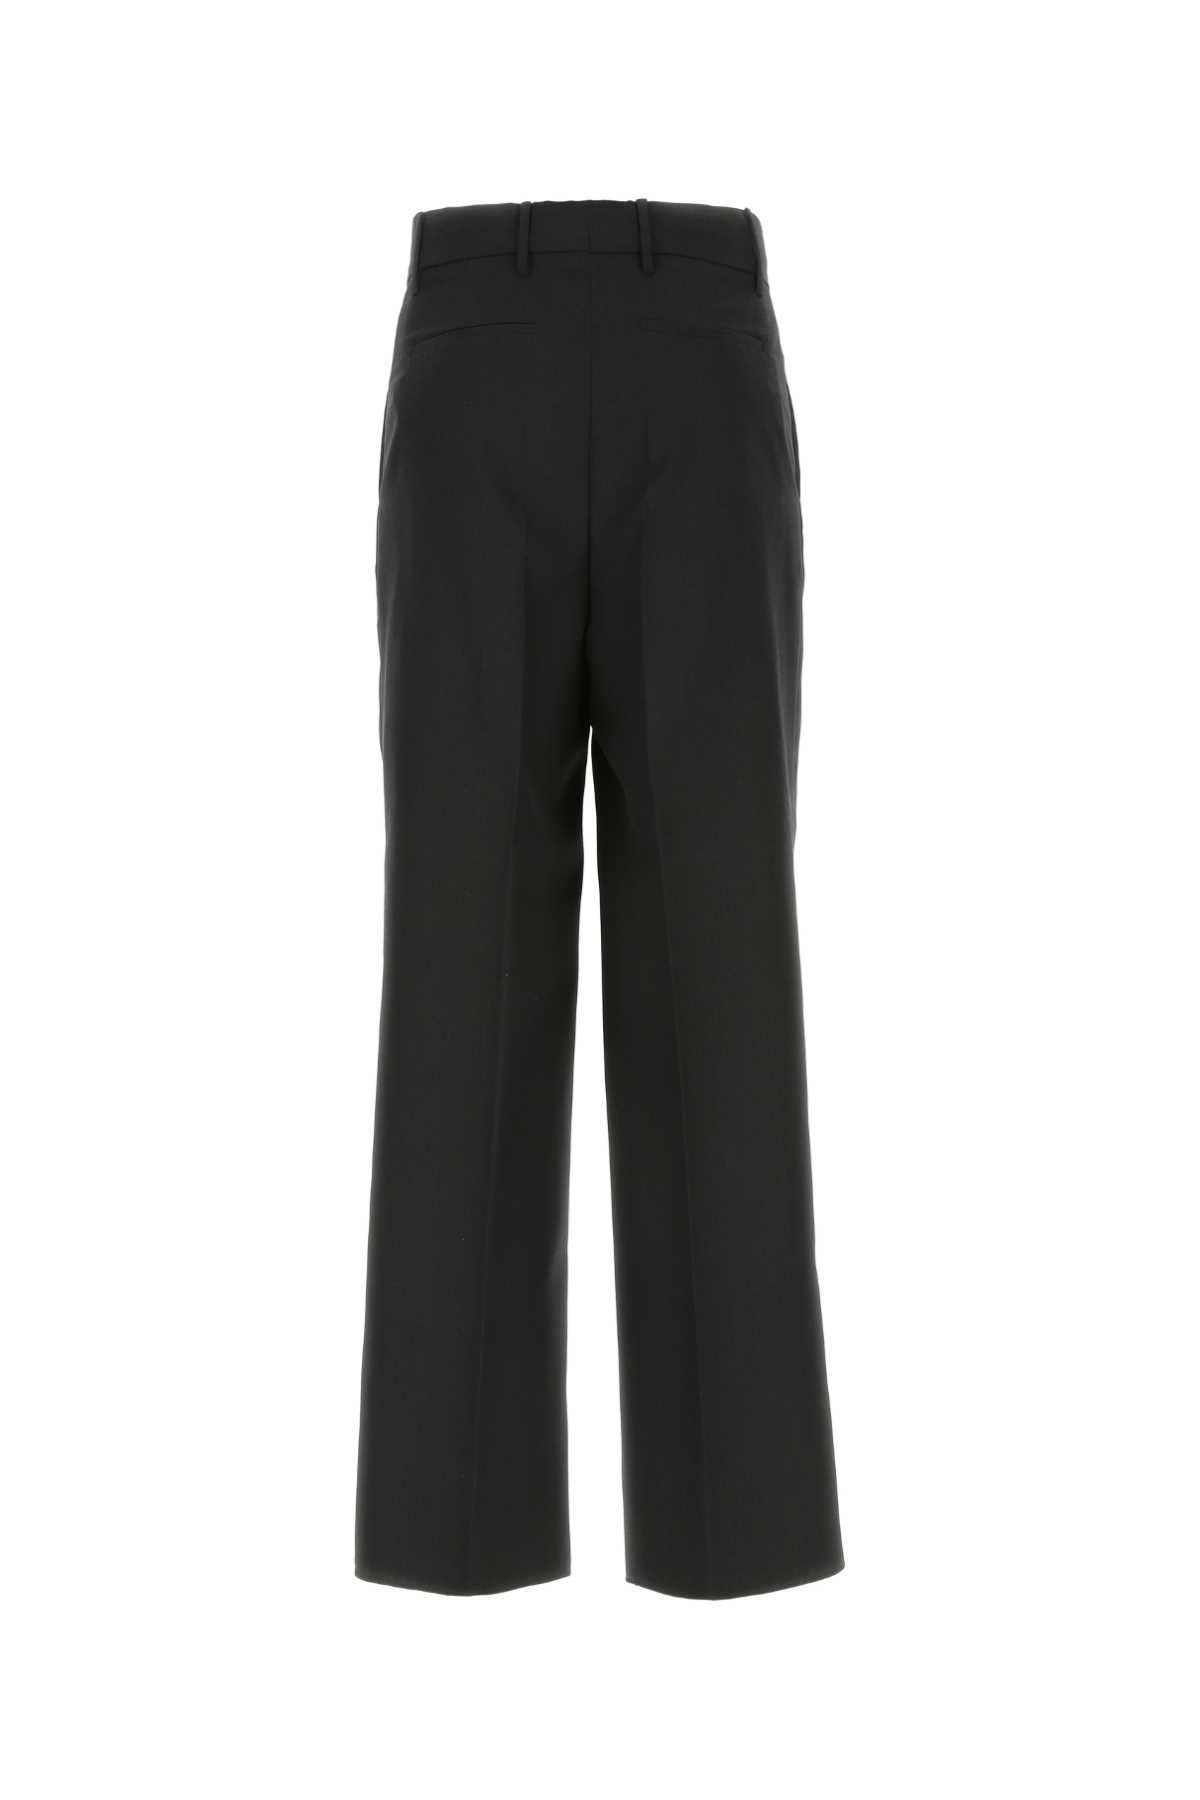 Givenchy Black Wool Trouser In 025